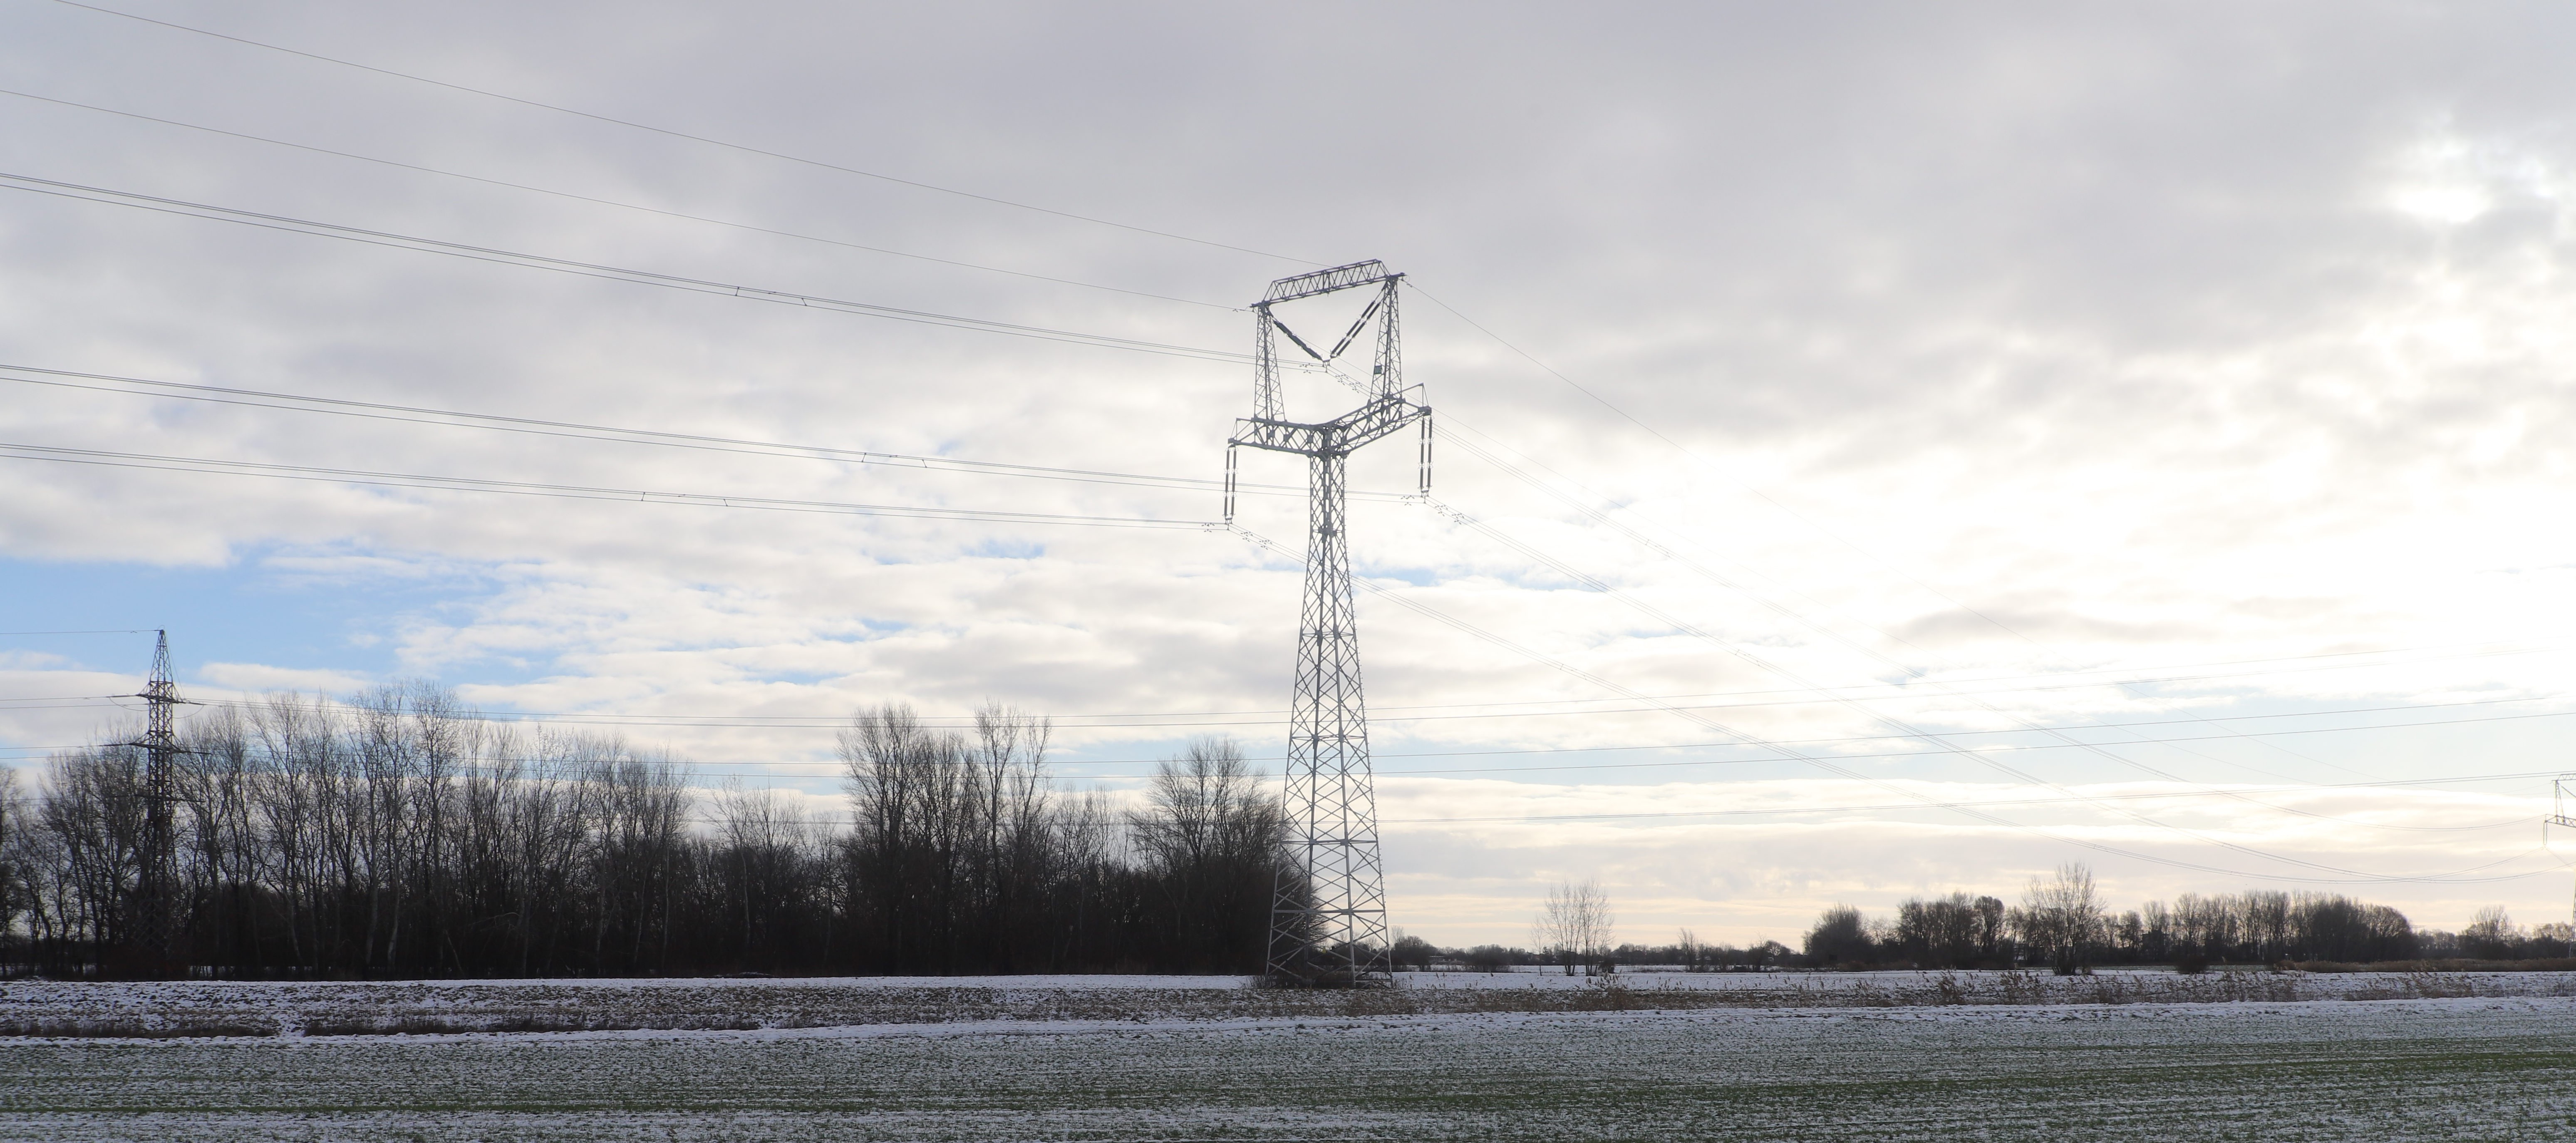 image of the 400kW power lines from the field survey 